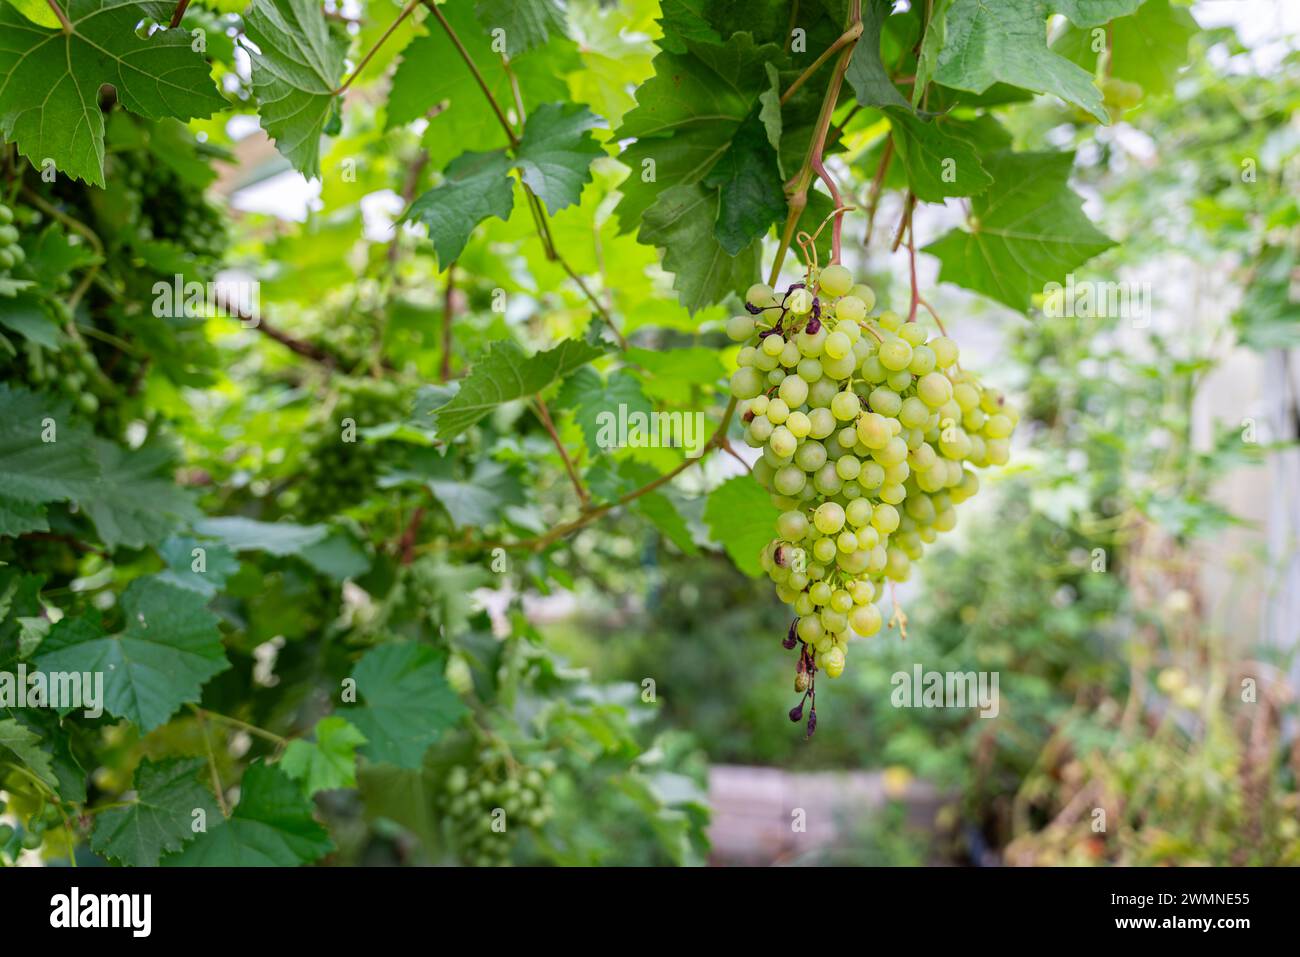 White grapes in a greenhouse background. Grapevine in greenhouse. Unripe green grapes. Leaves and green bunches of grapes. Green background. Stock Photo